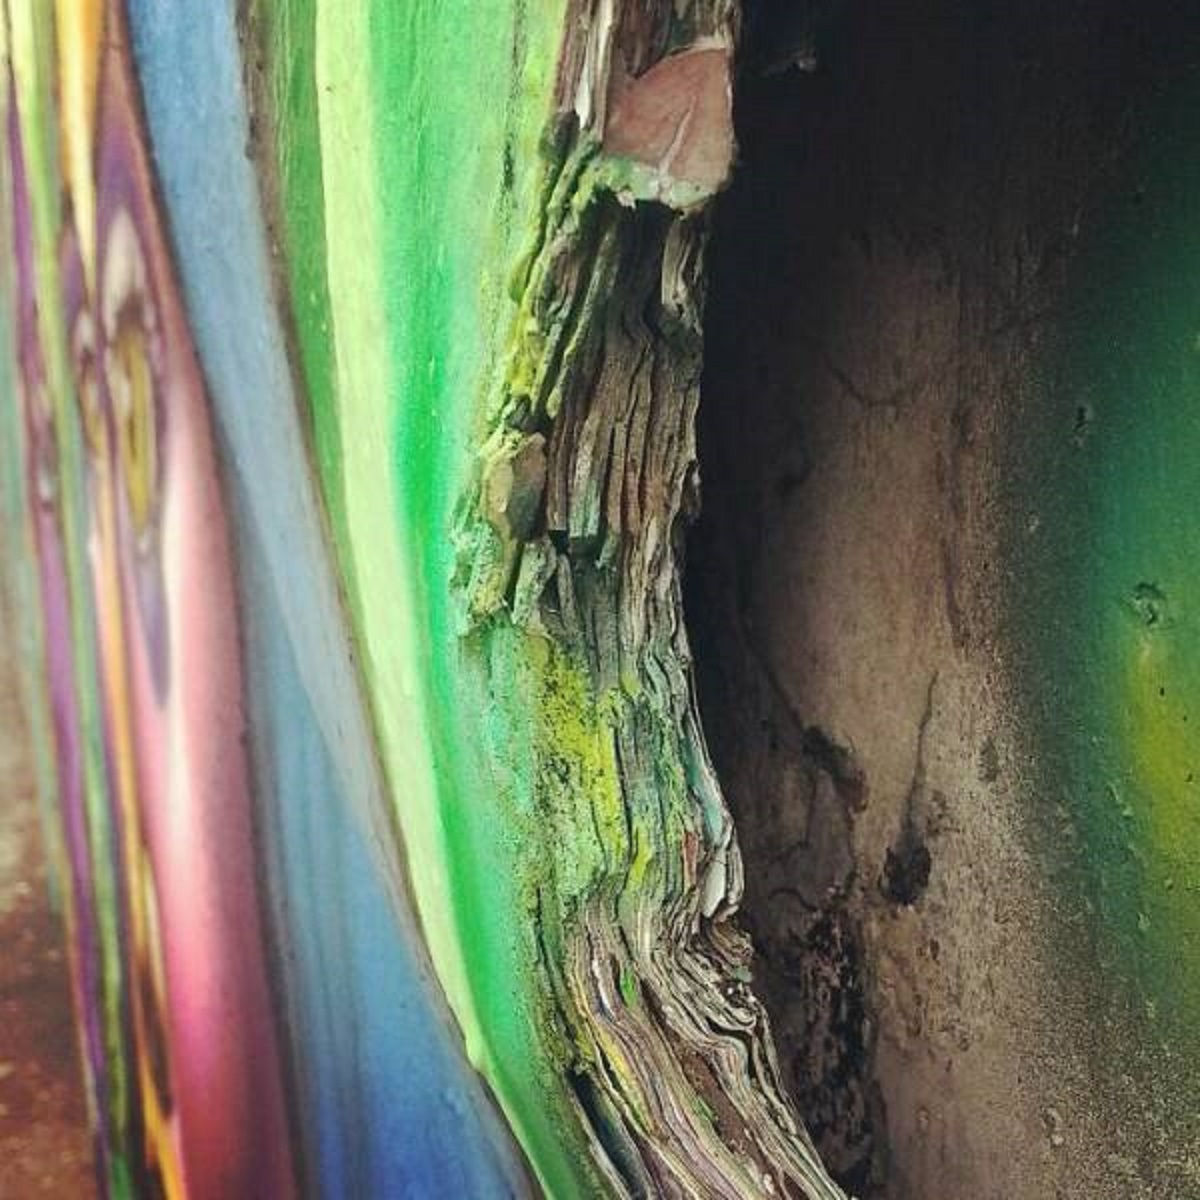 "All The Layers Of Paint On The Berlin Wall"